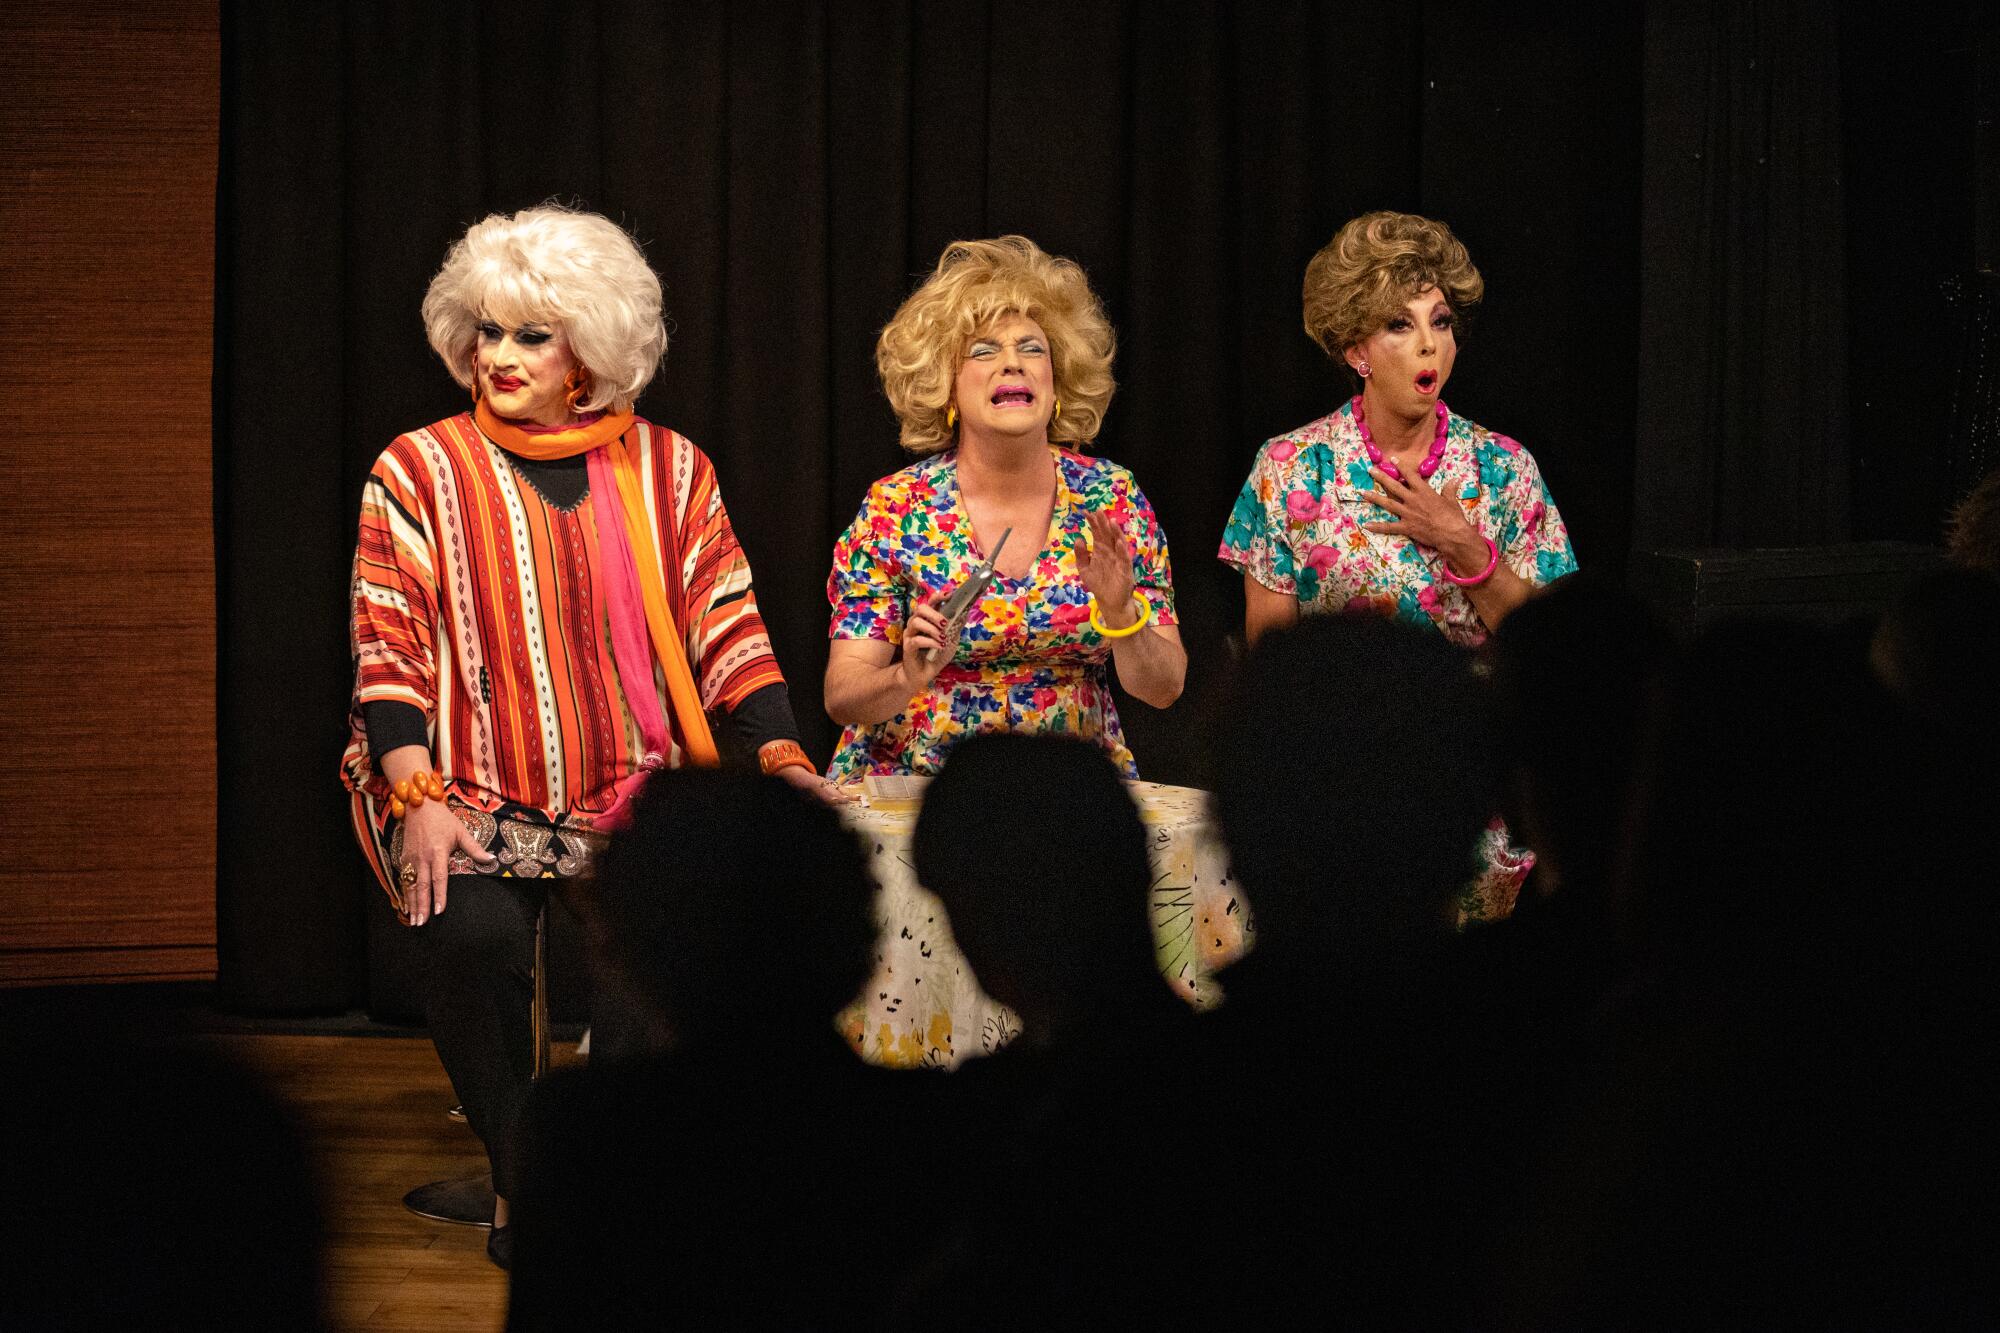 Three drag queens perform on a stage.